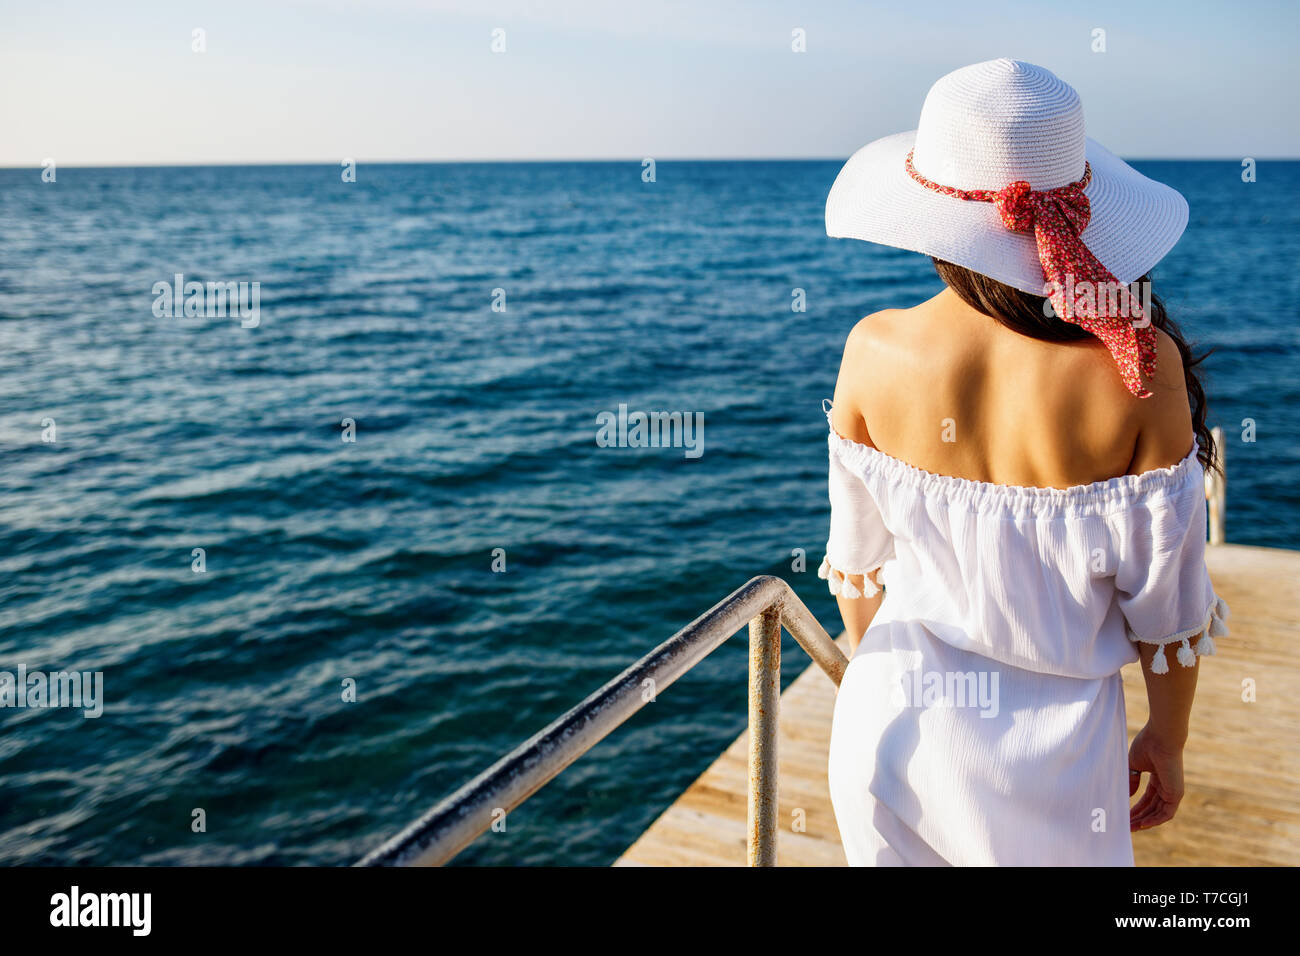 Back view on woman in white summer dress walking on wooden pier. Stock Photo